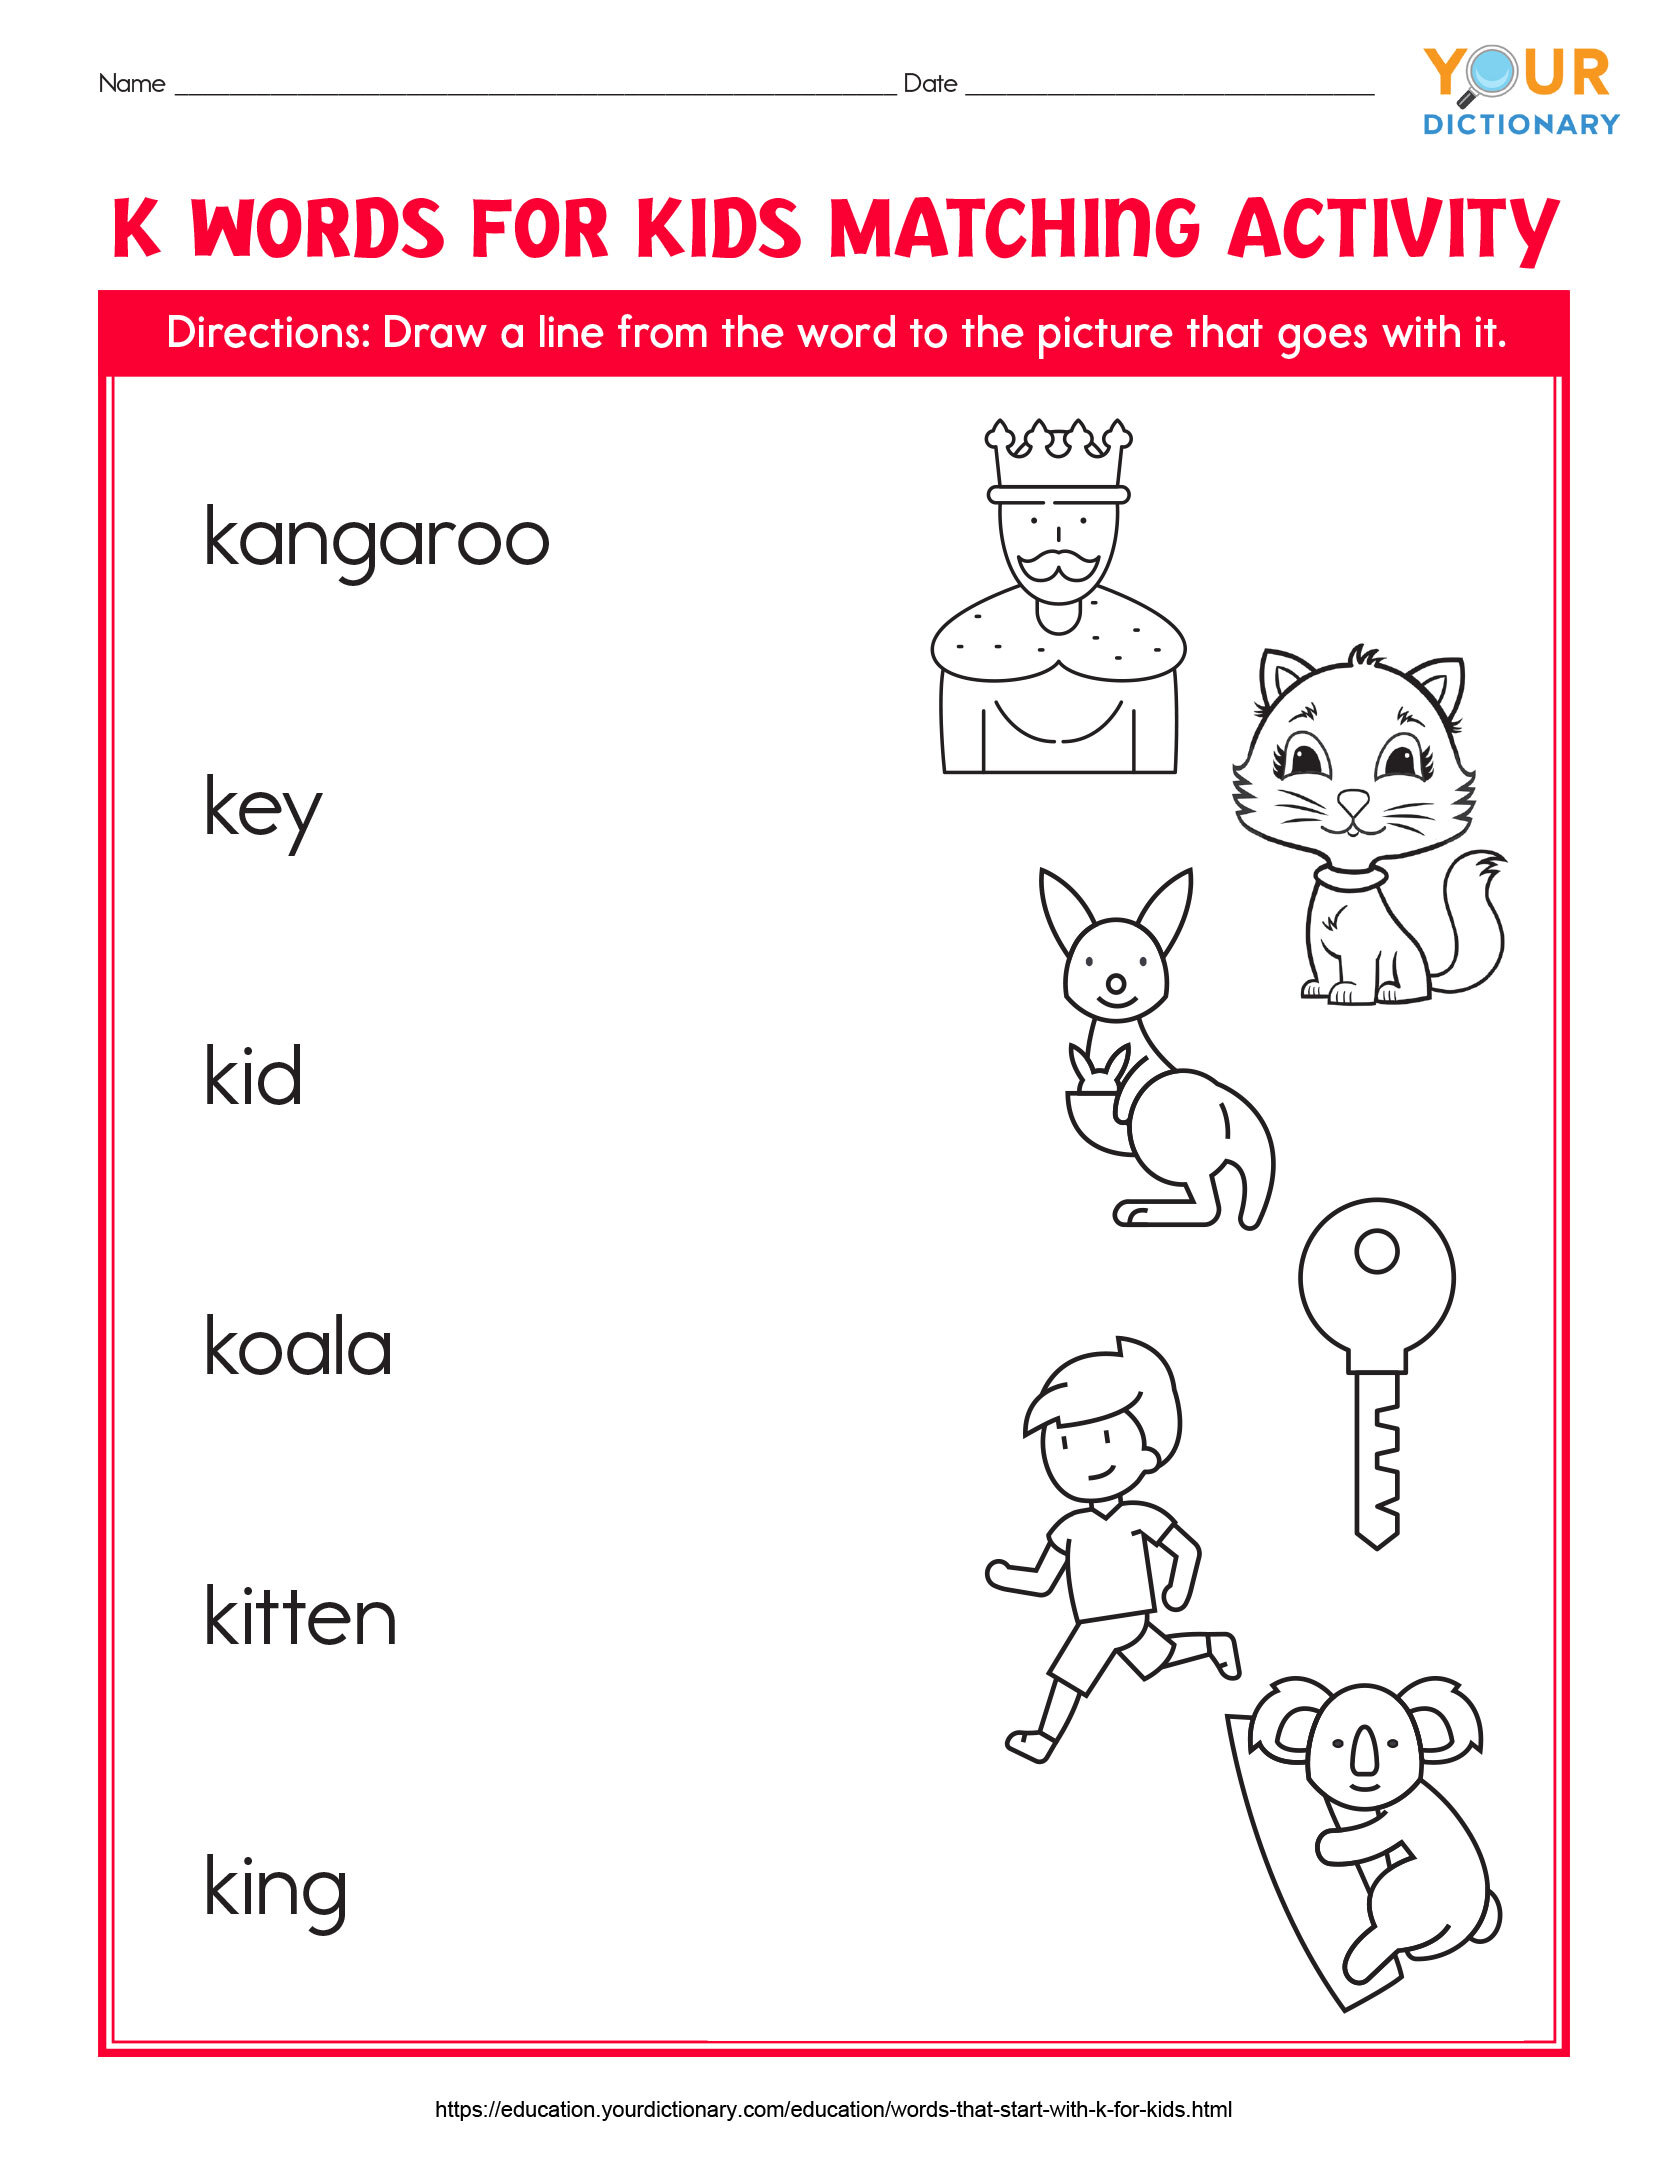 k words for kids matching activity